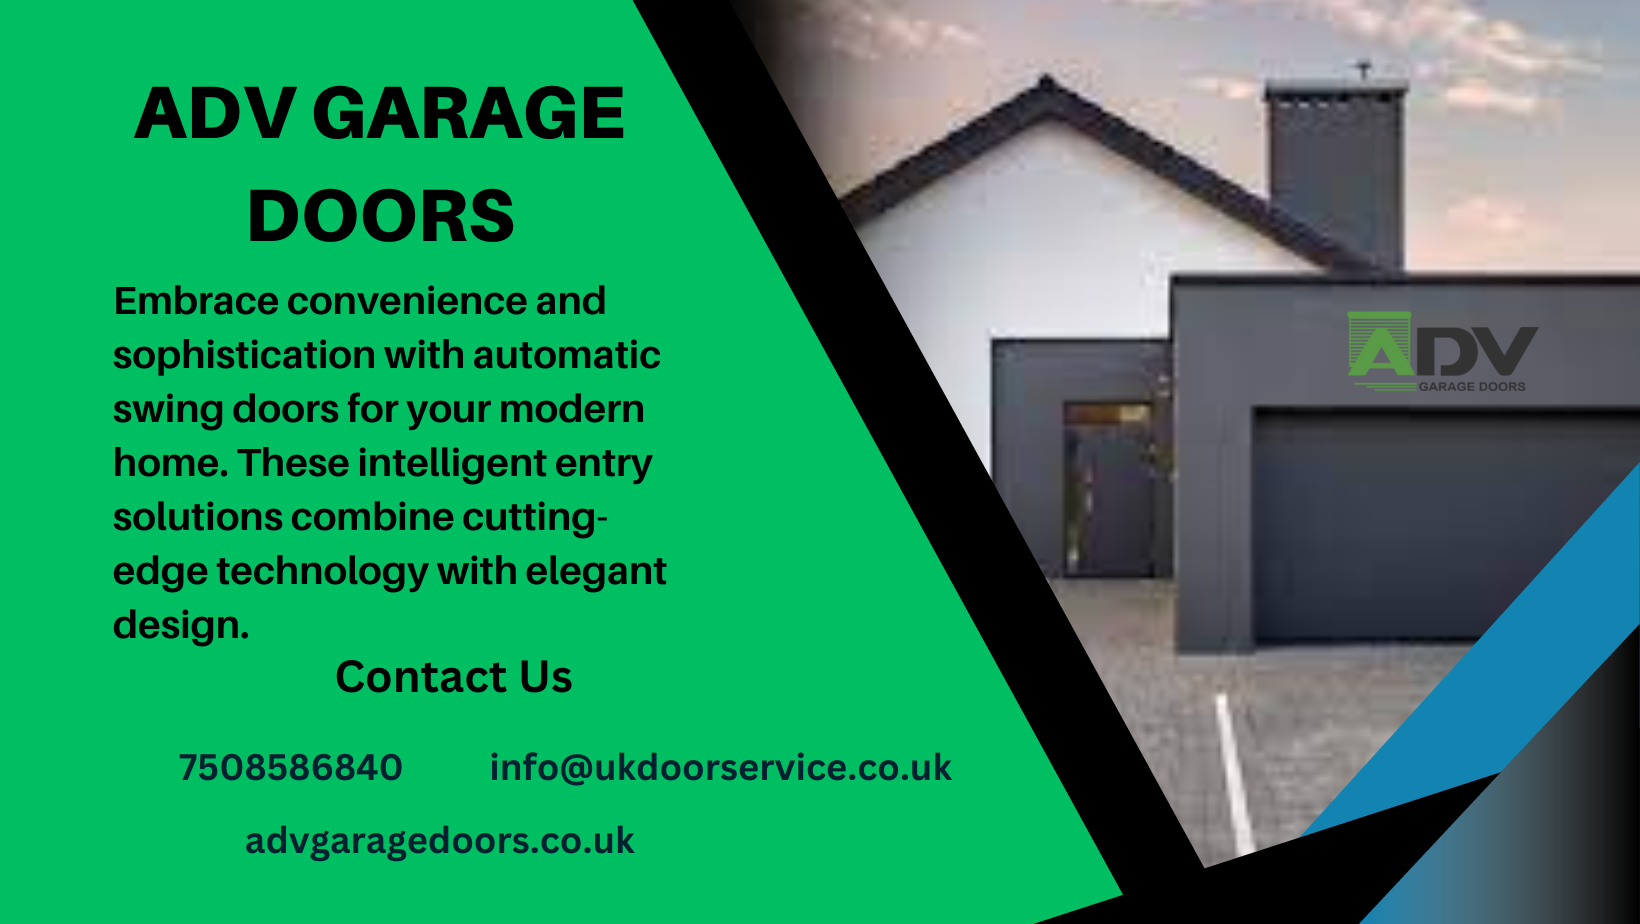 Finding the Right Garage Service Near You